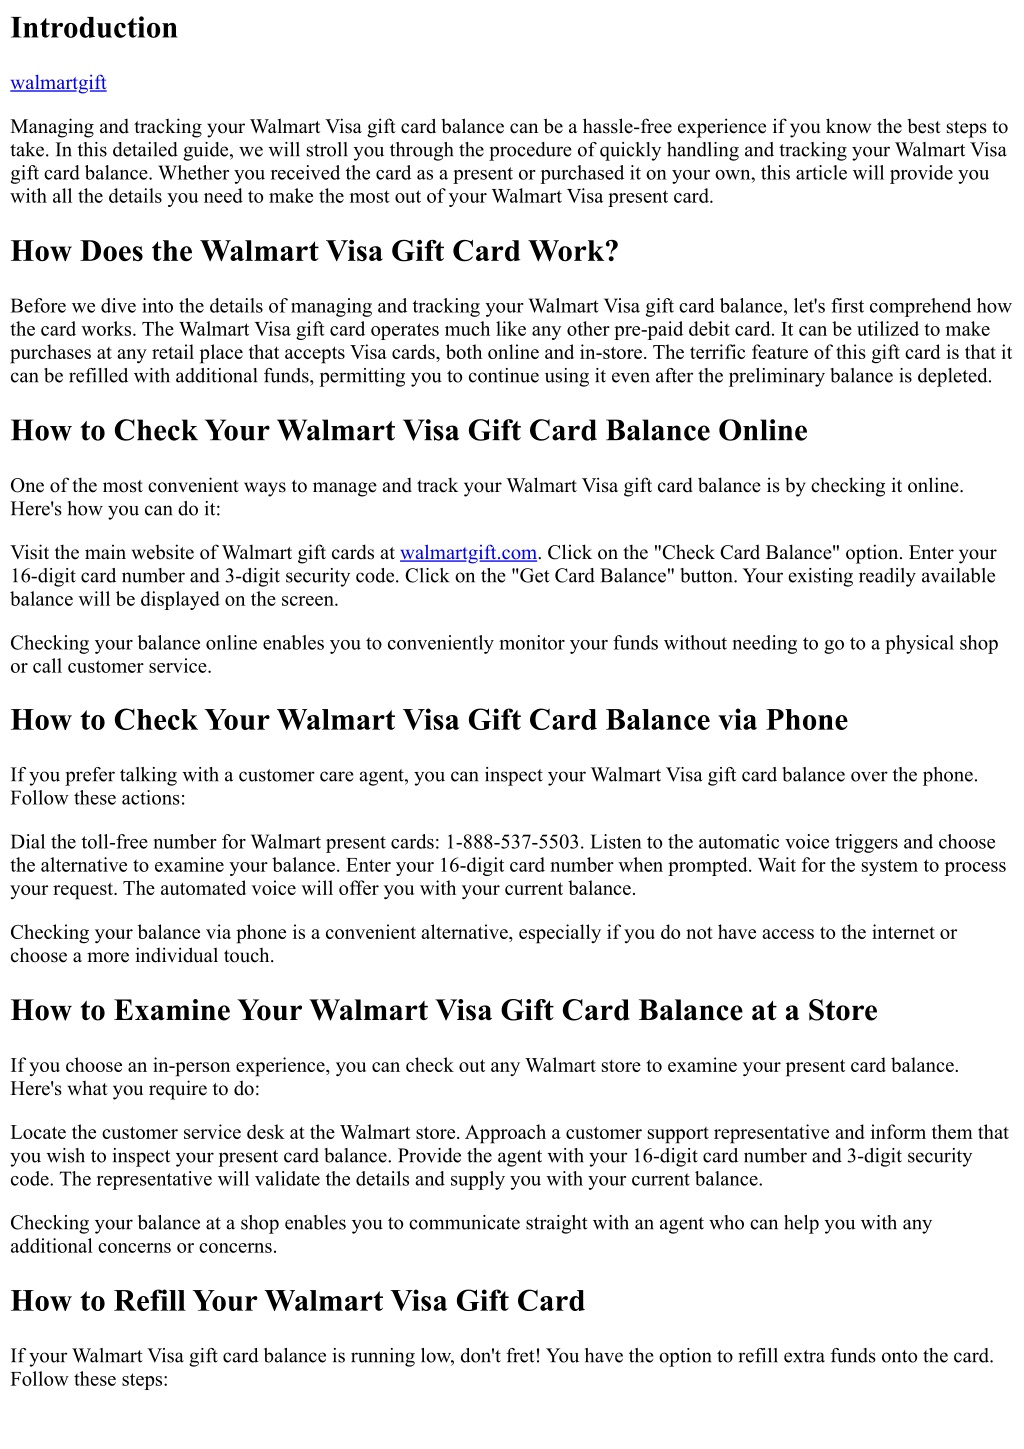 PPT - How to Quickly Handle and Track Your Walmart Visa Gift Card